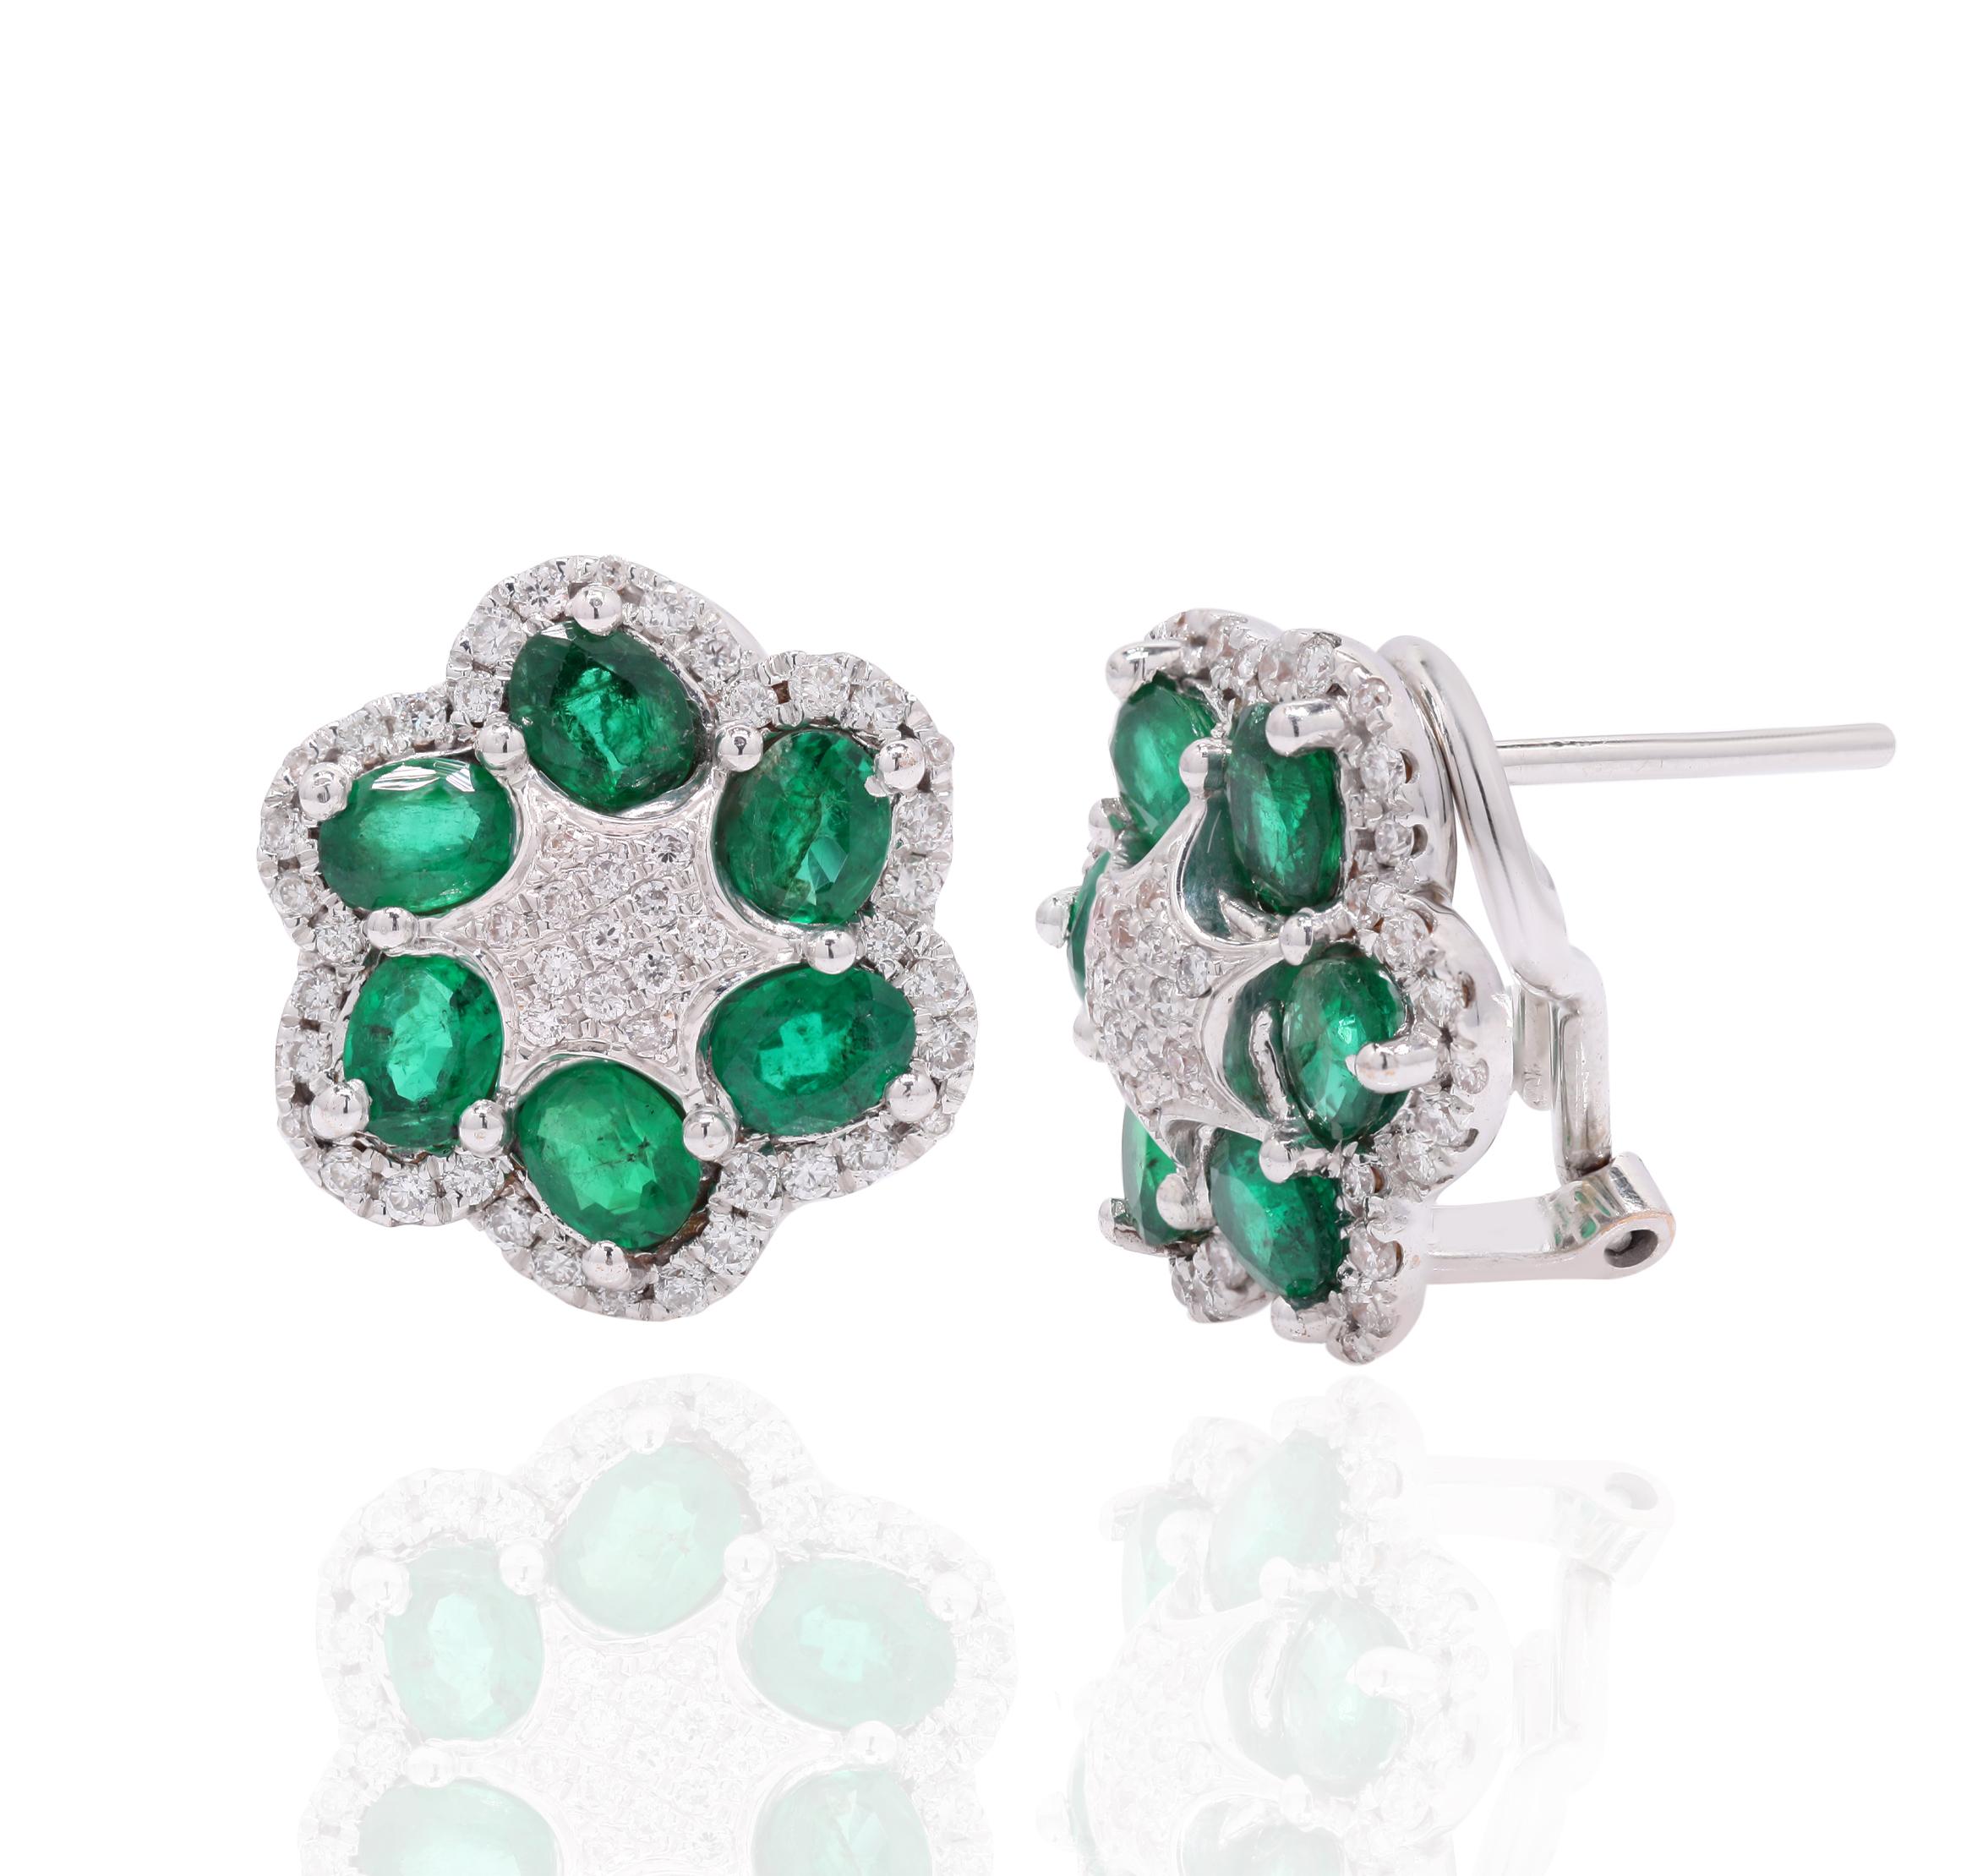 Earrings create a subtle beauty while showcasing the colors of the natural precious gemstones and illuminating diamonds making a statement.
Oval cut Emerald and Diamond Clip On Stud earrings in 14K gold. Embrace your look with these stunning pair of